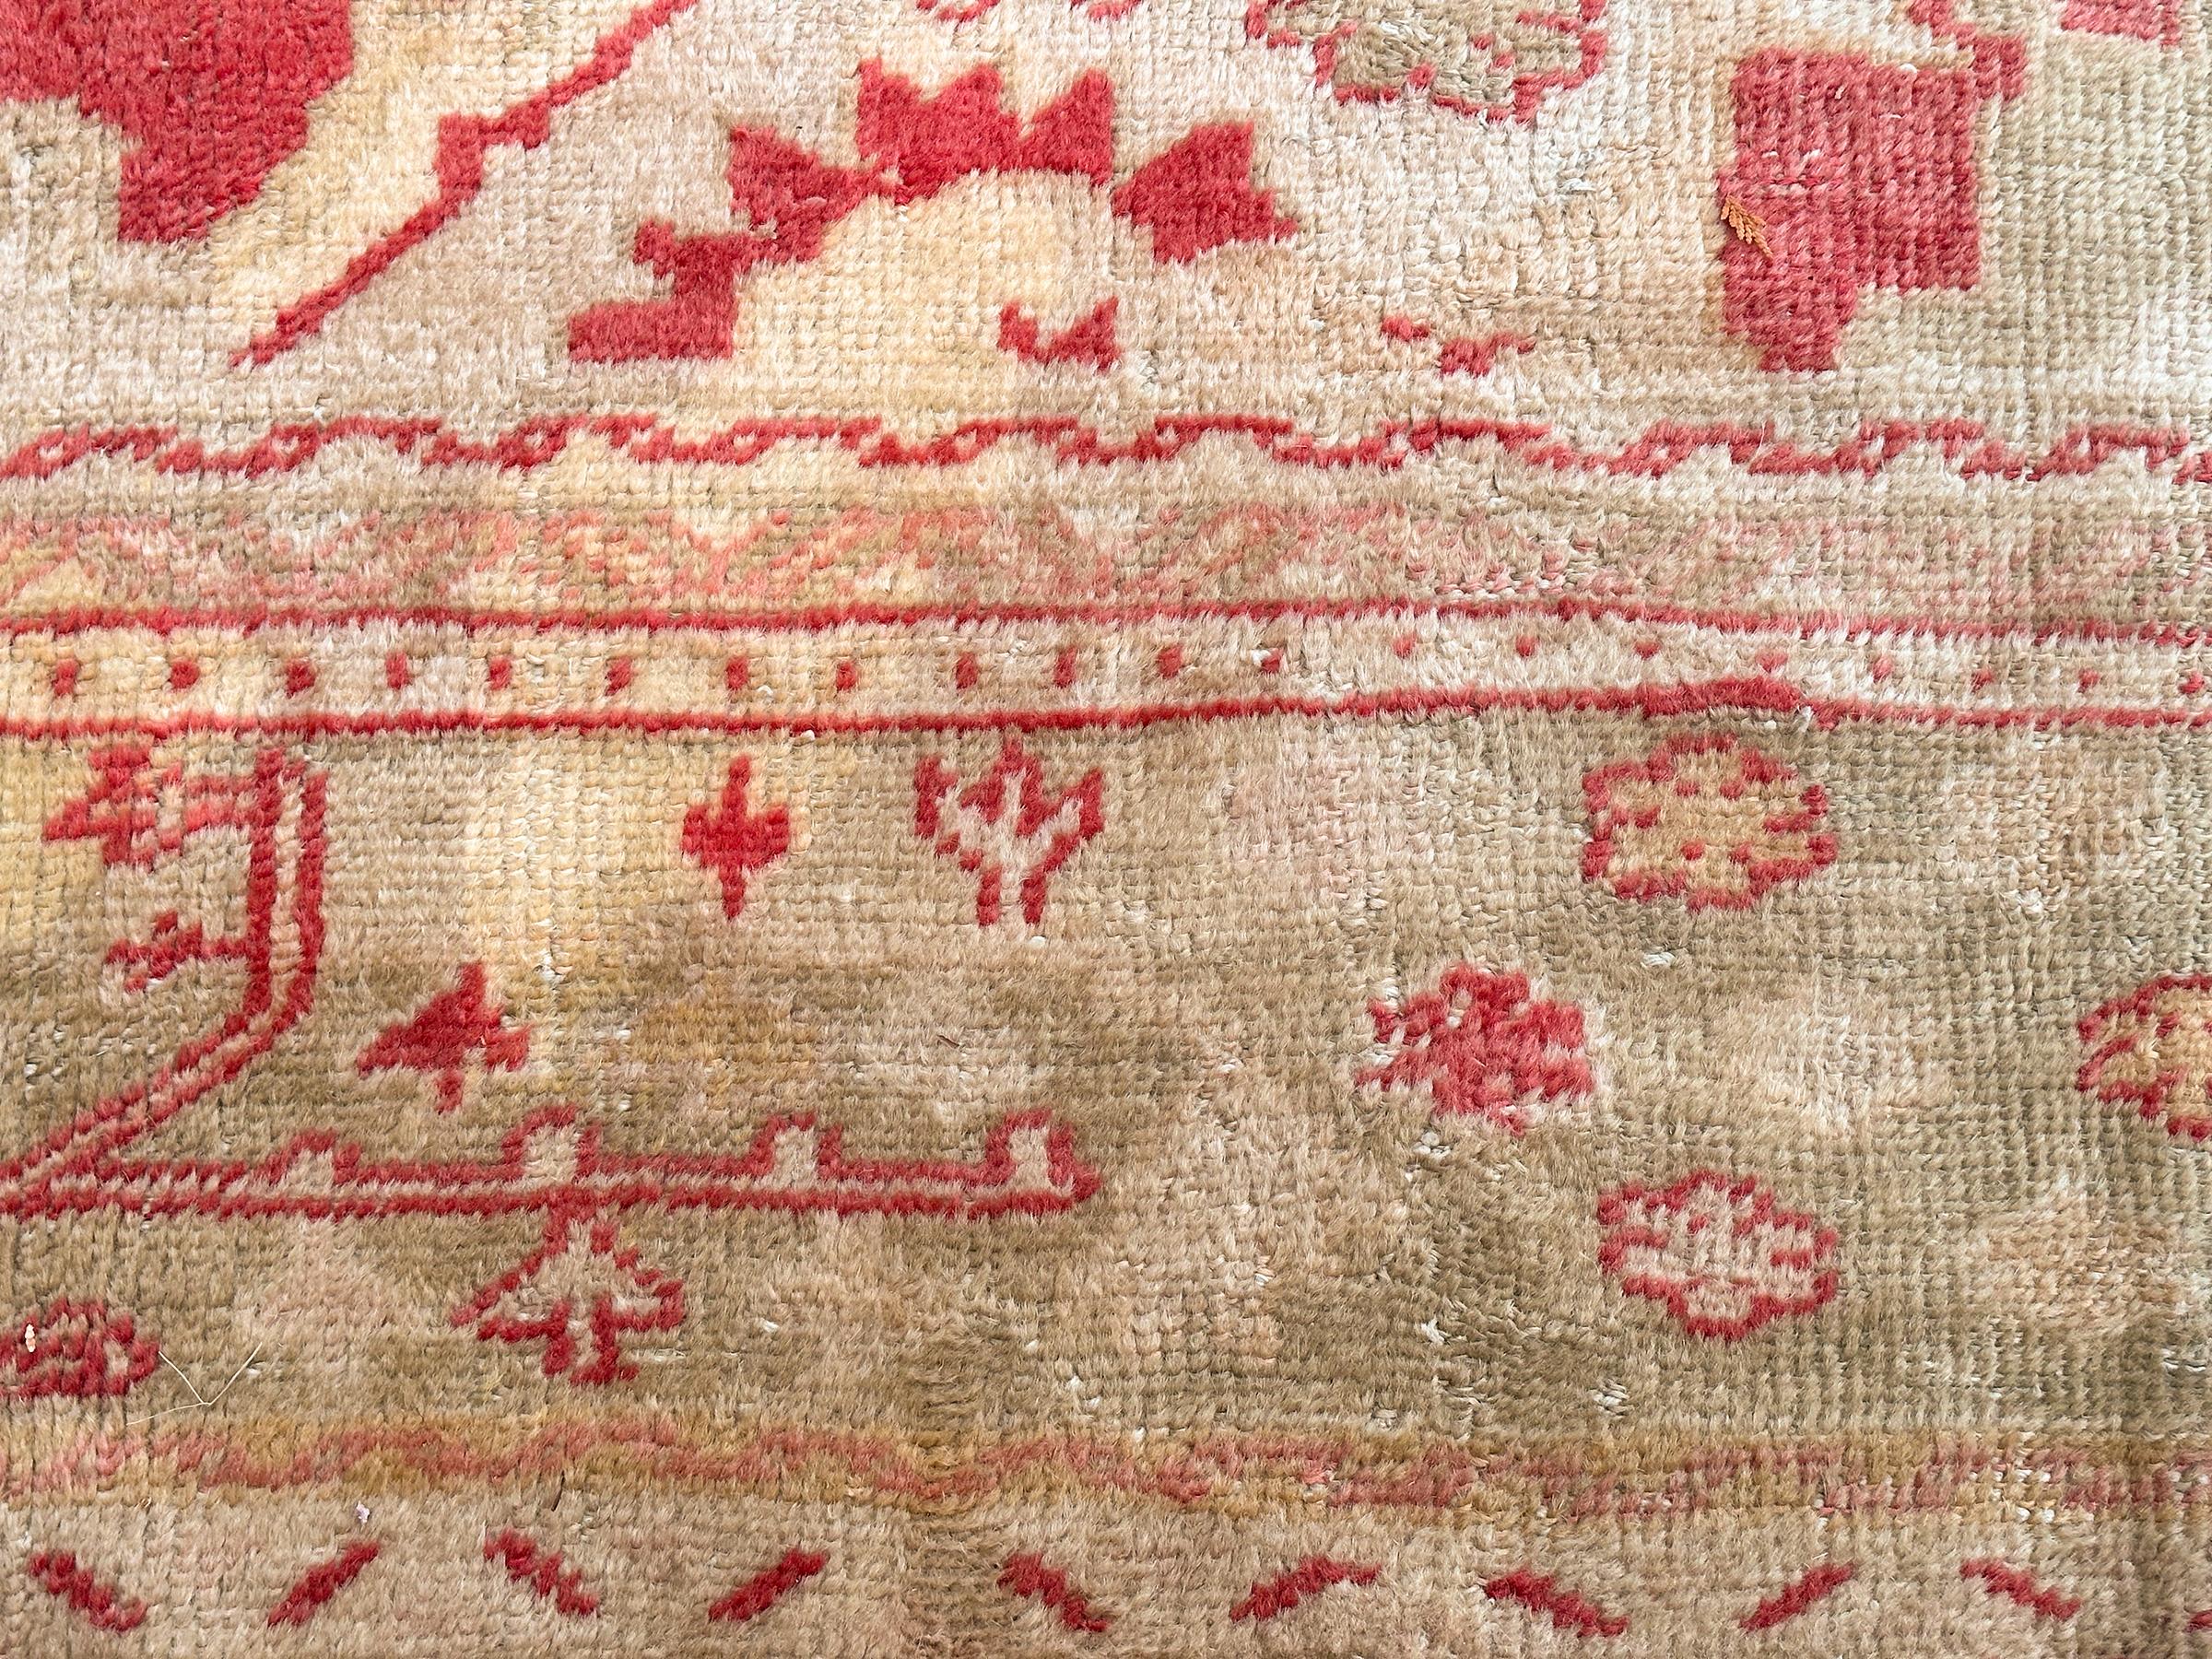 Hand-Knotted Authentic Antique Oushak Oversized Wool Foundation 1900 10x18 Handmade 305x549cm For Sale